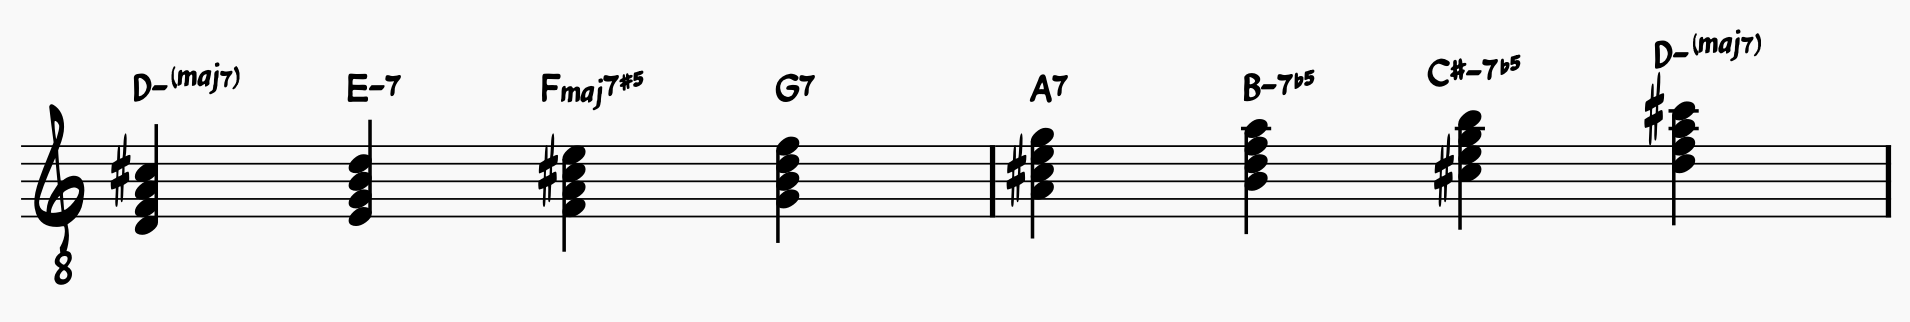 D melodic minor scale harmonizd in seventh chords.